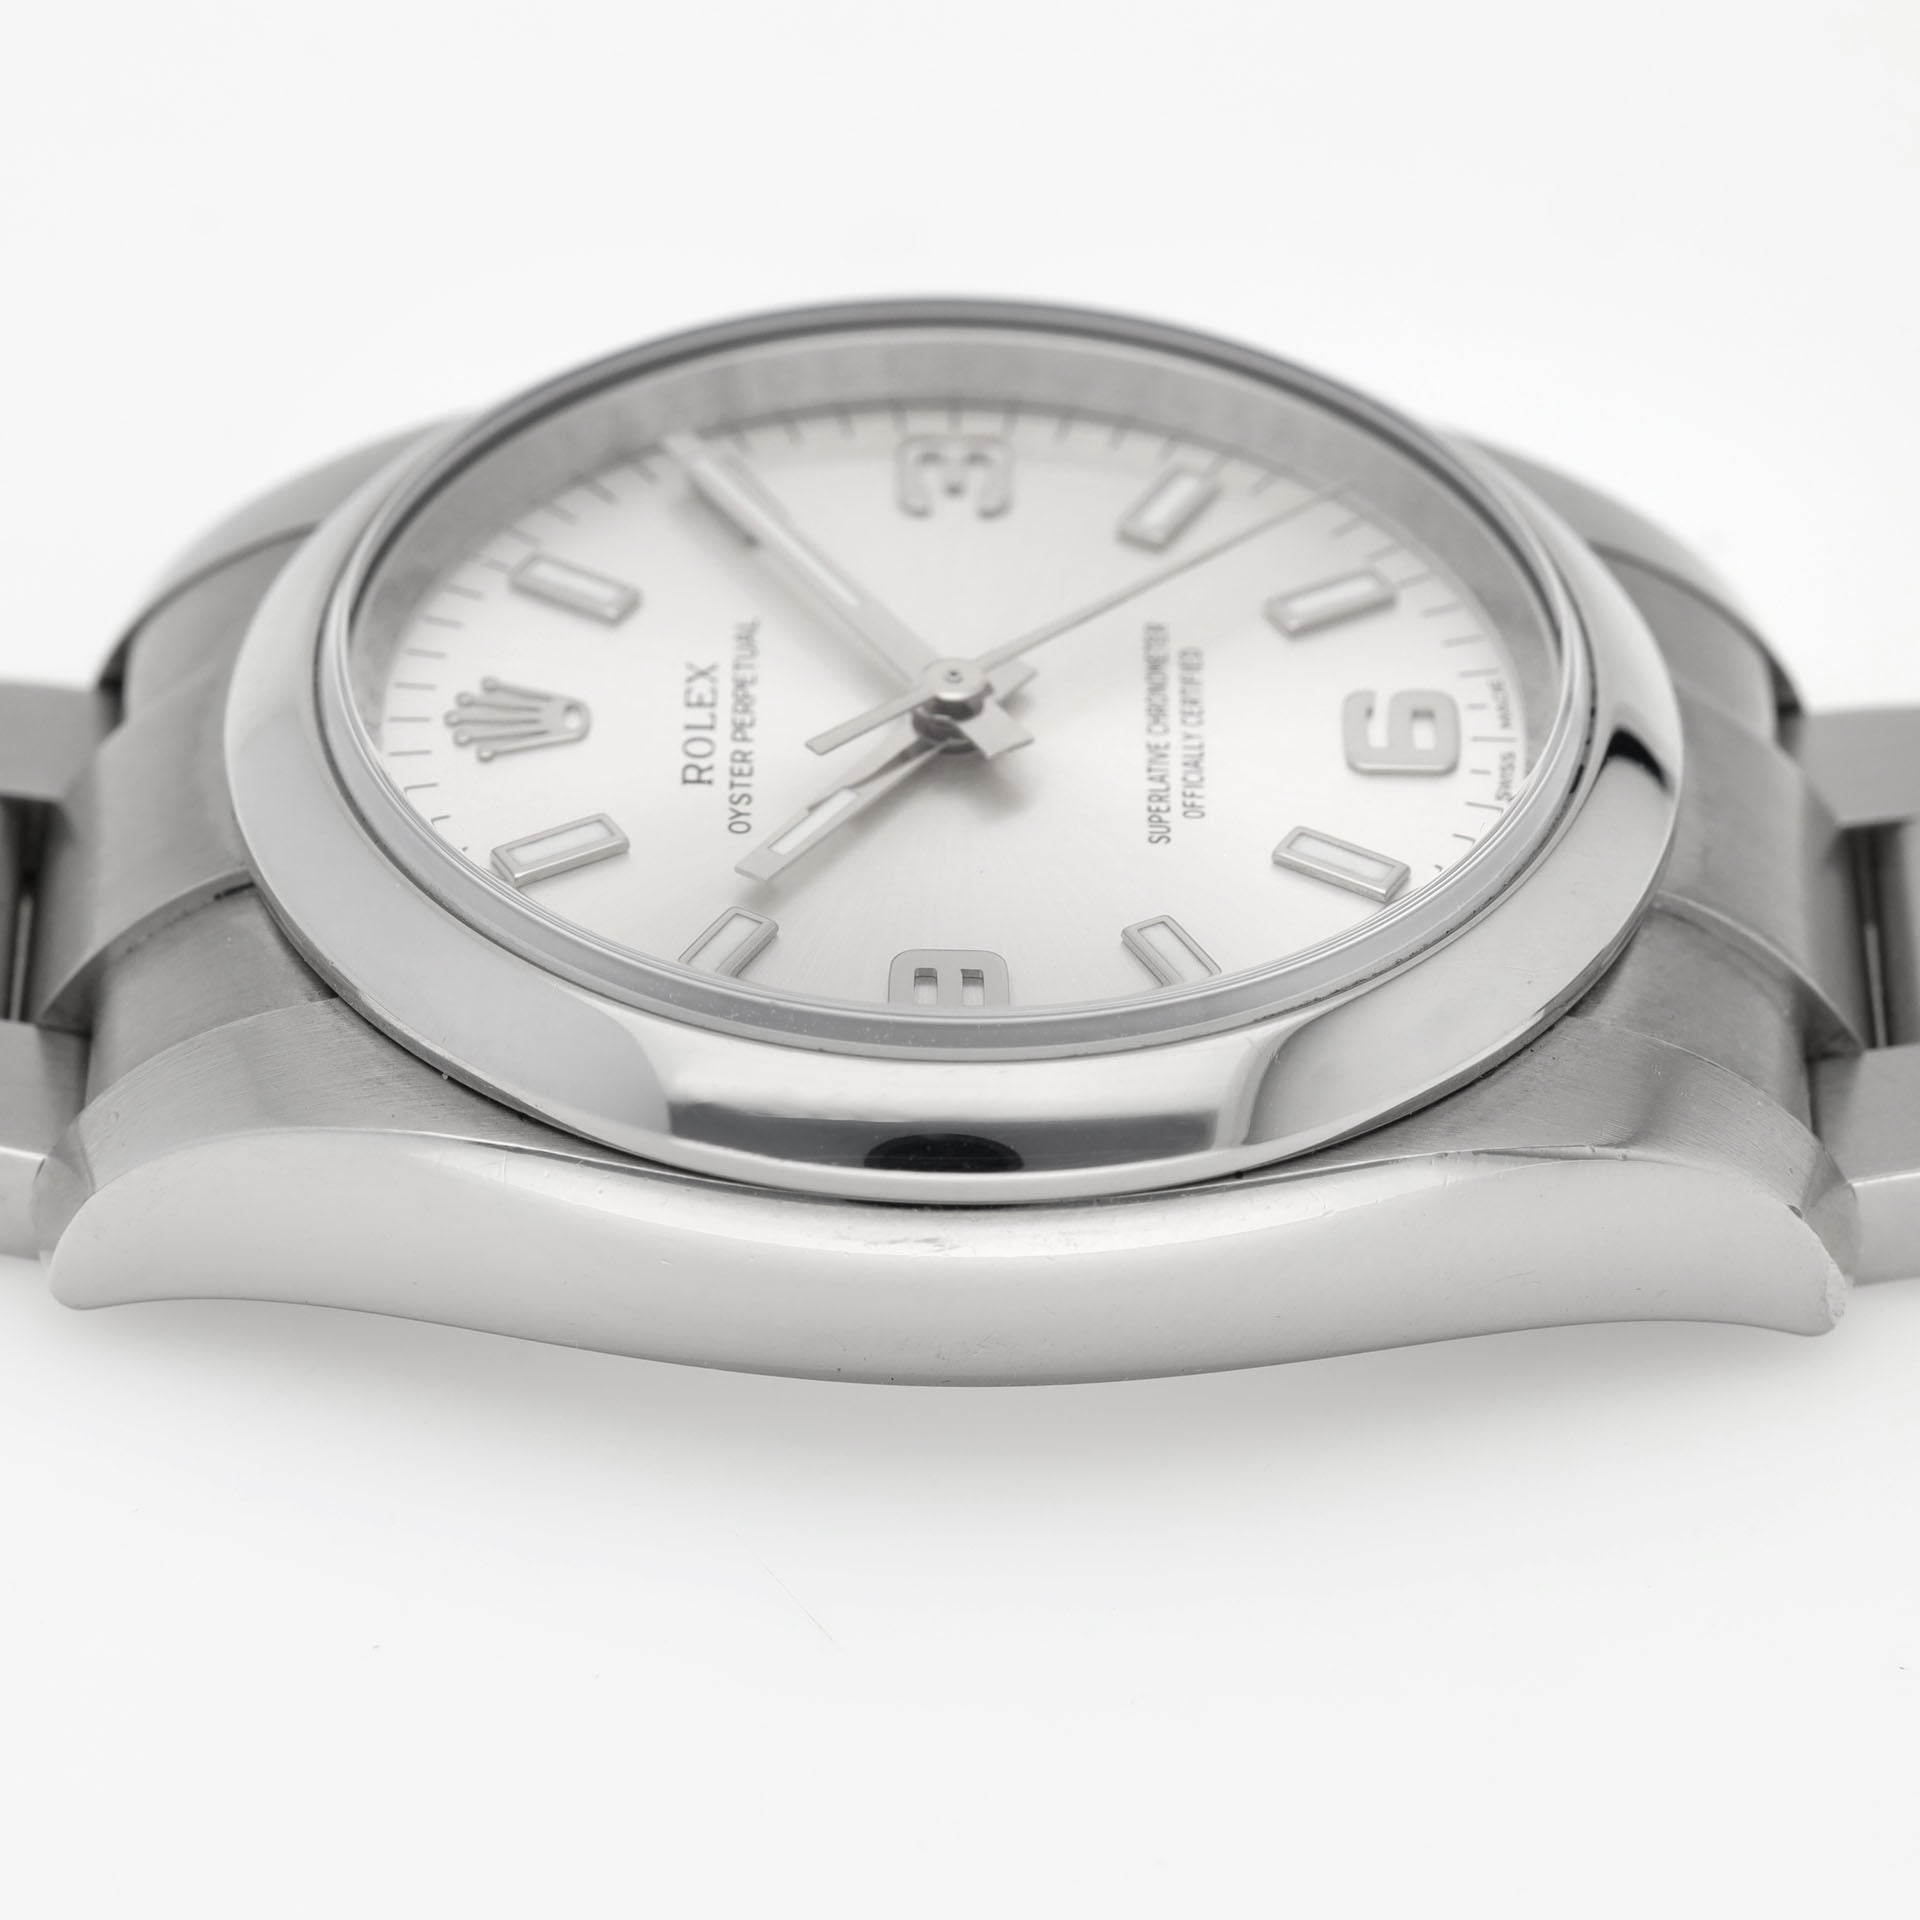 Rolex Oyster Perpetual 114200 Silver Explorer Dial 